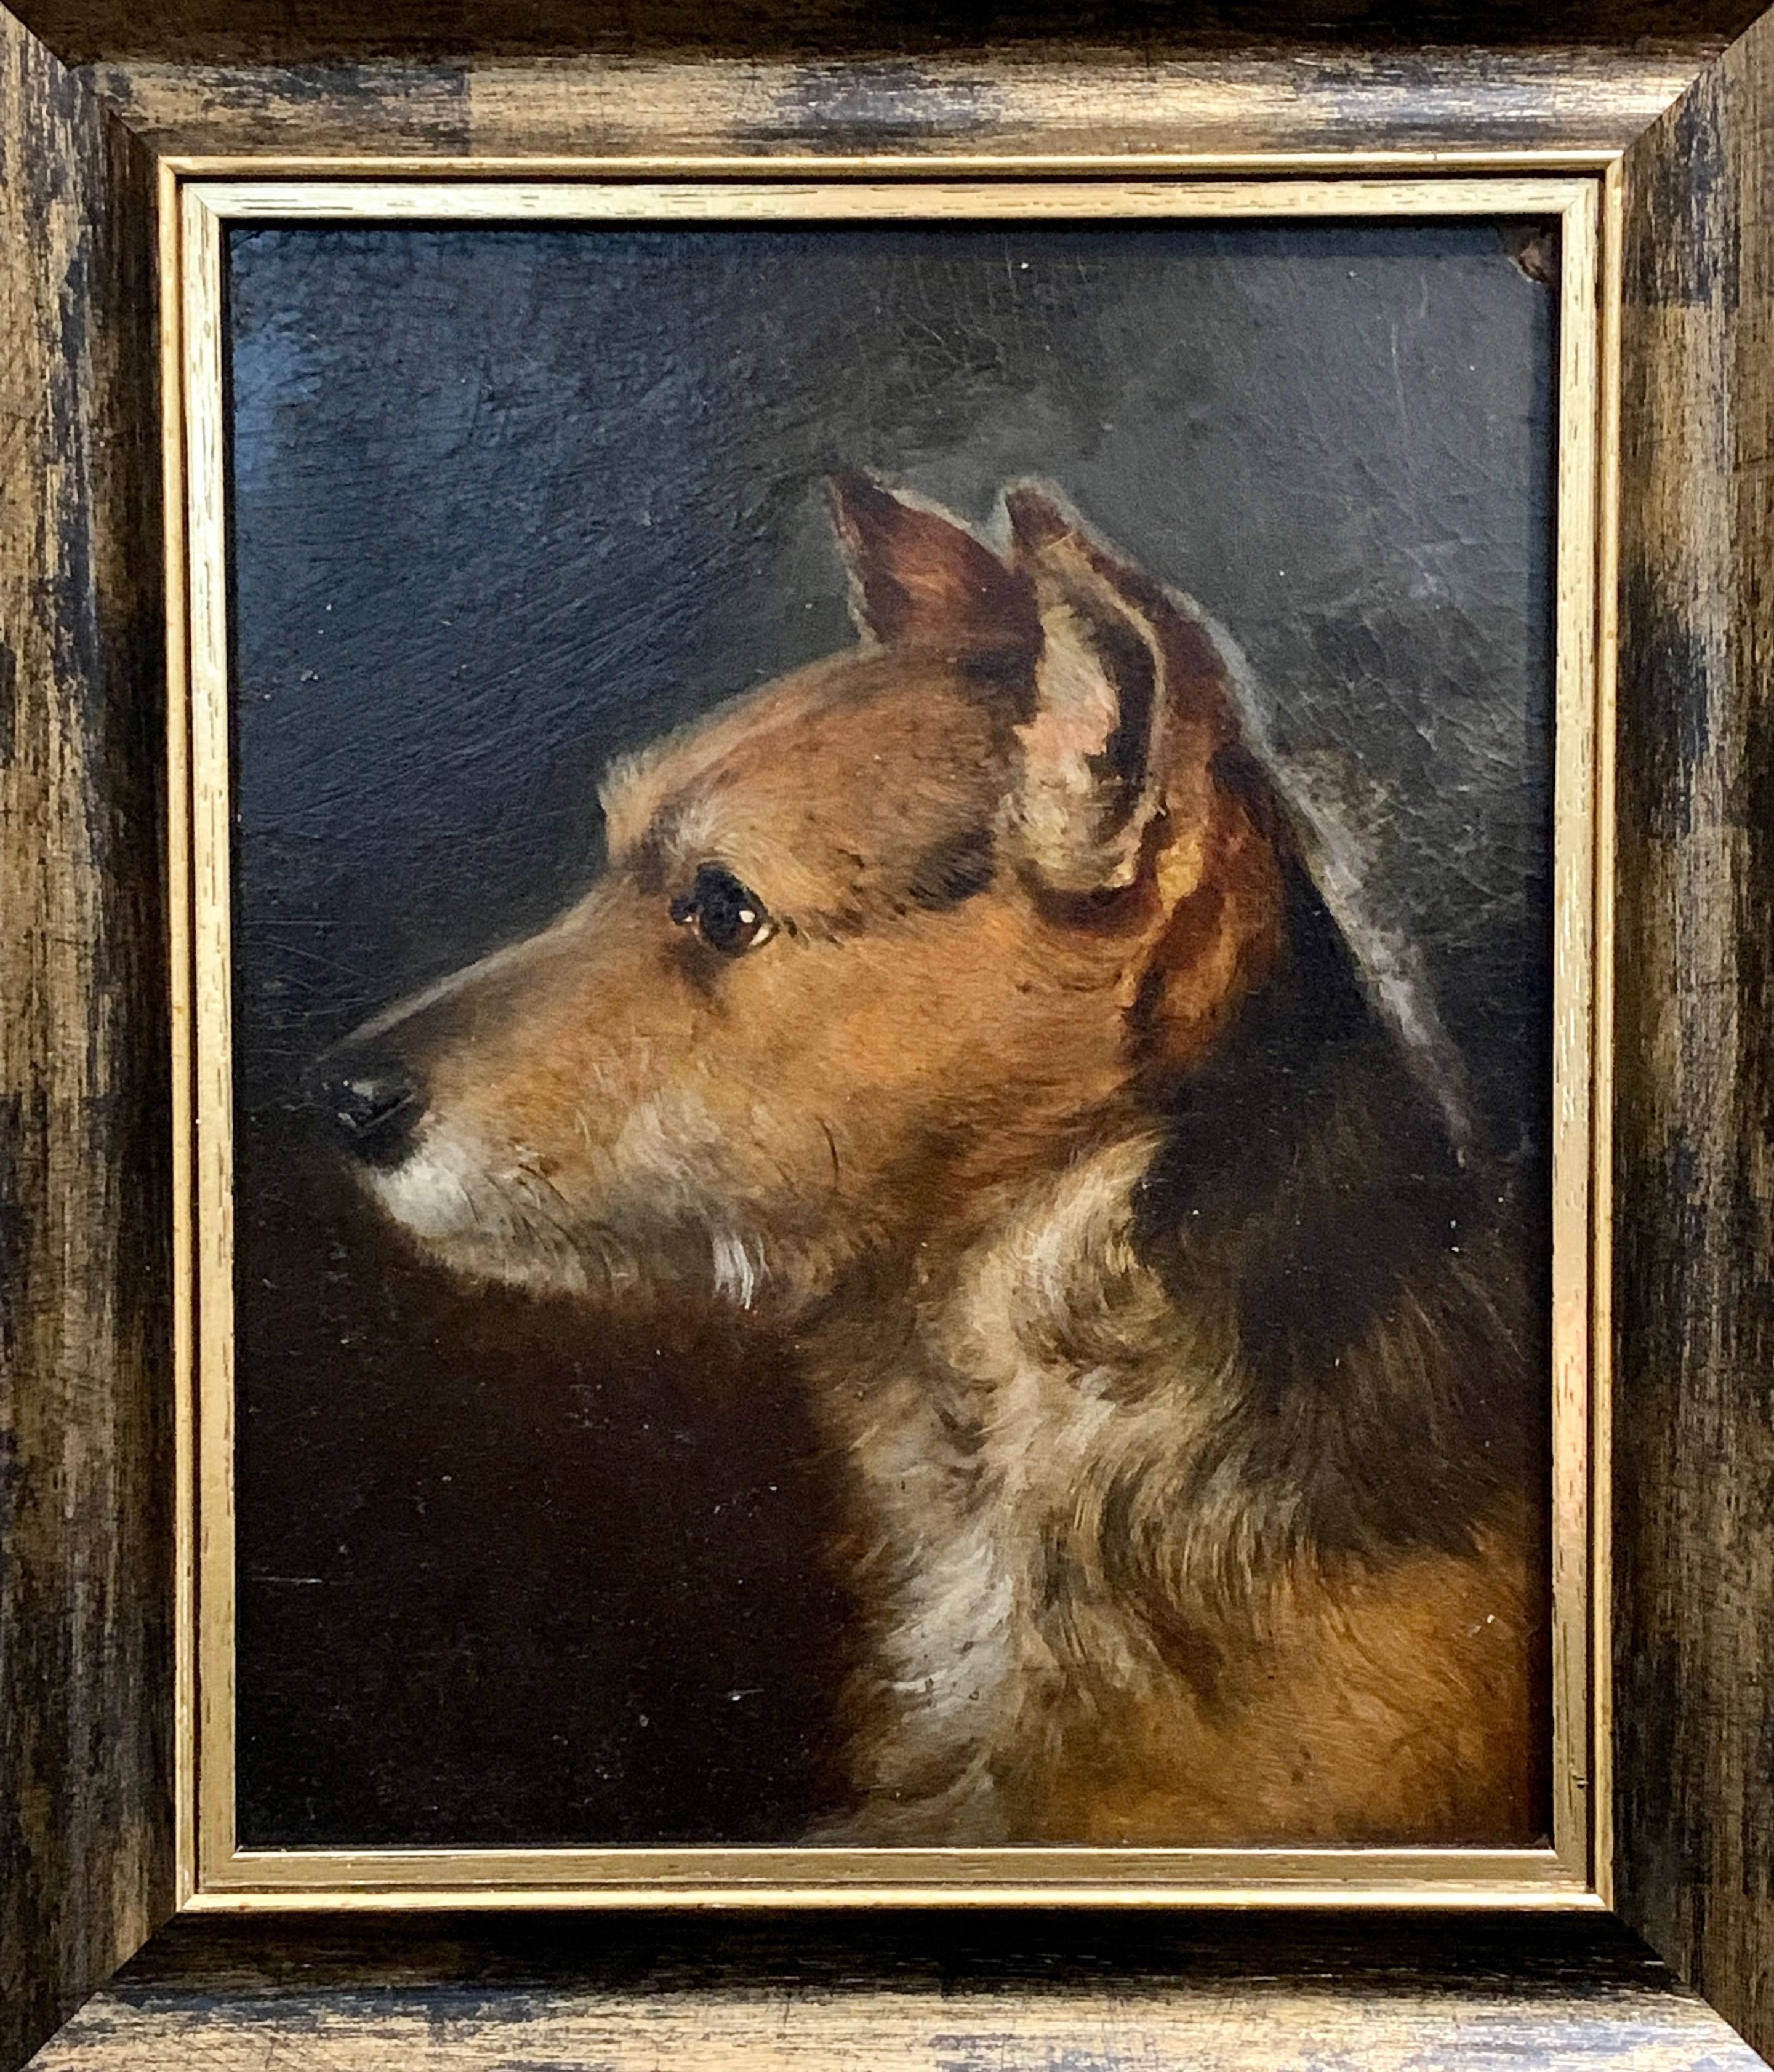 George Earl Portrait Painting - 19th century Antique English portrait of a terrier dog head in profile